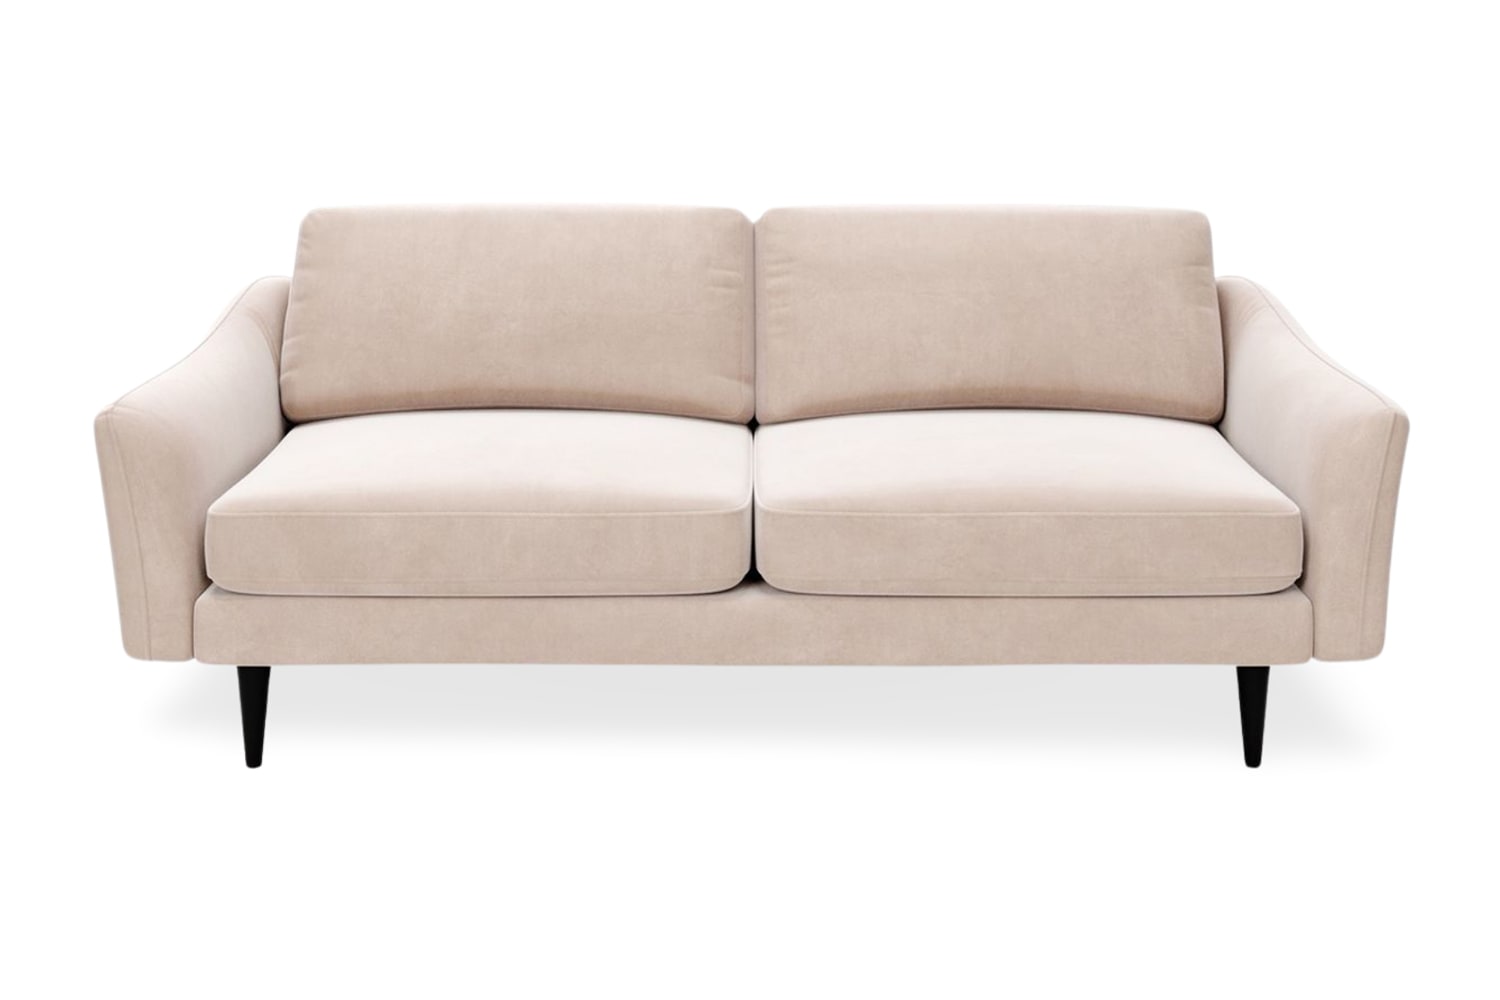 SNUG | The Rebel 3 Seater Sofa in Taupe variant_40414890557488